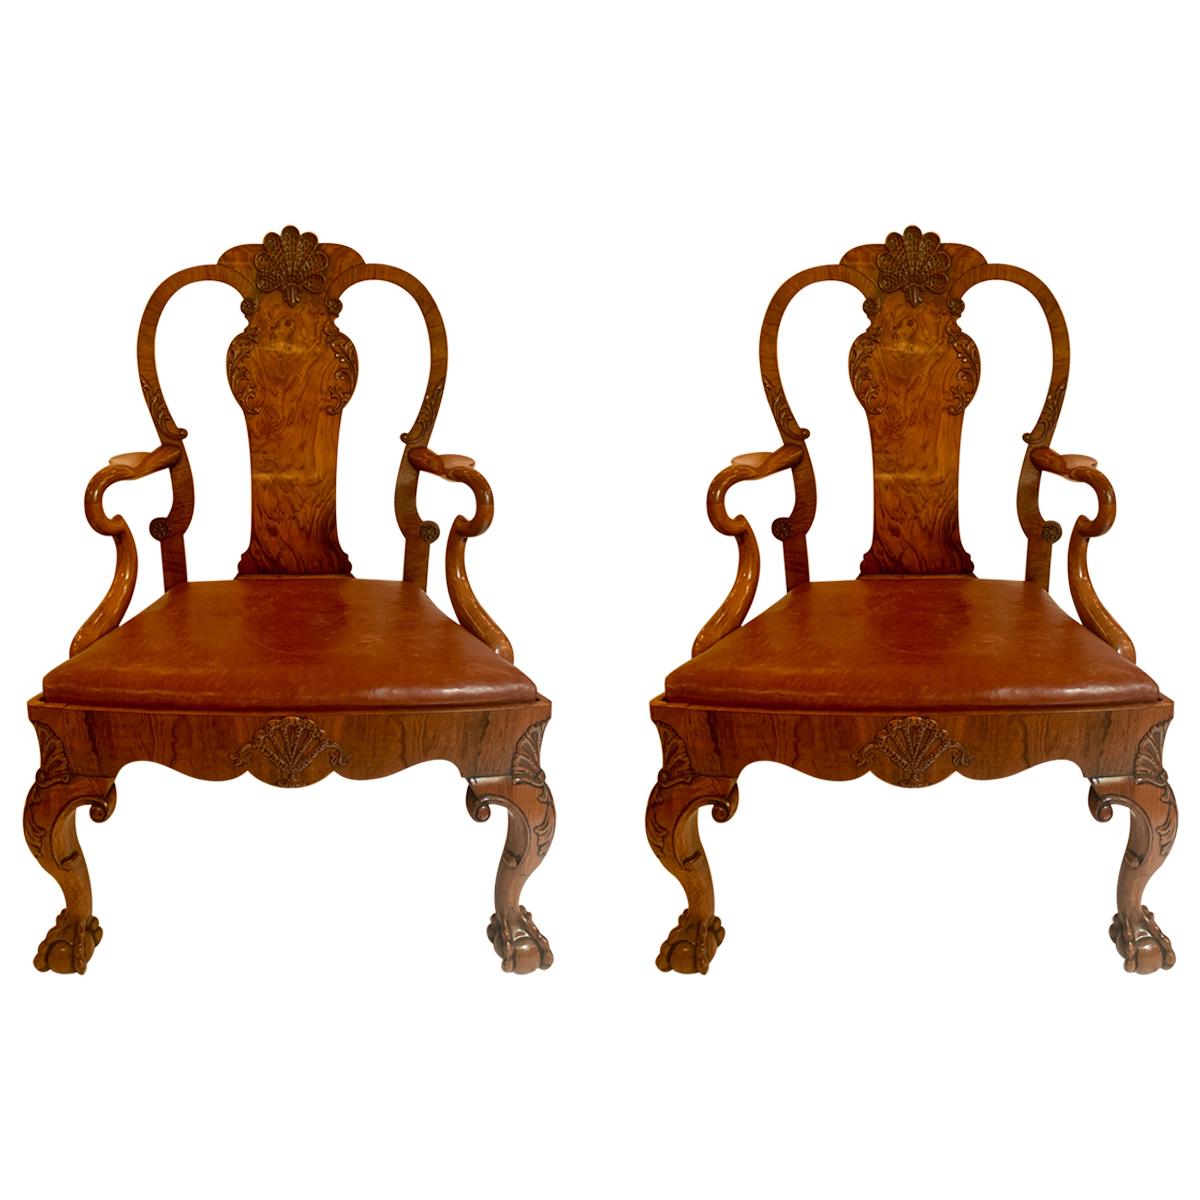 Pair of Antique English Walnut 19th Century Armchairs For Sale